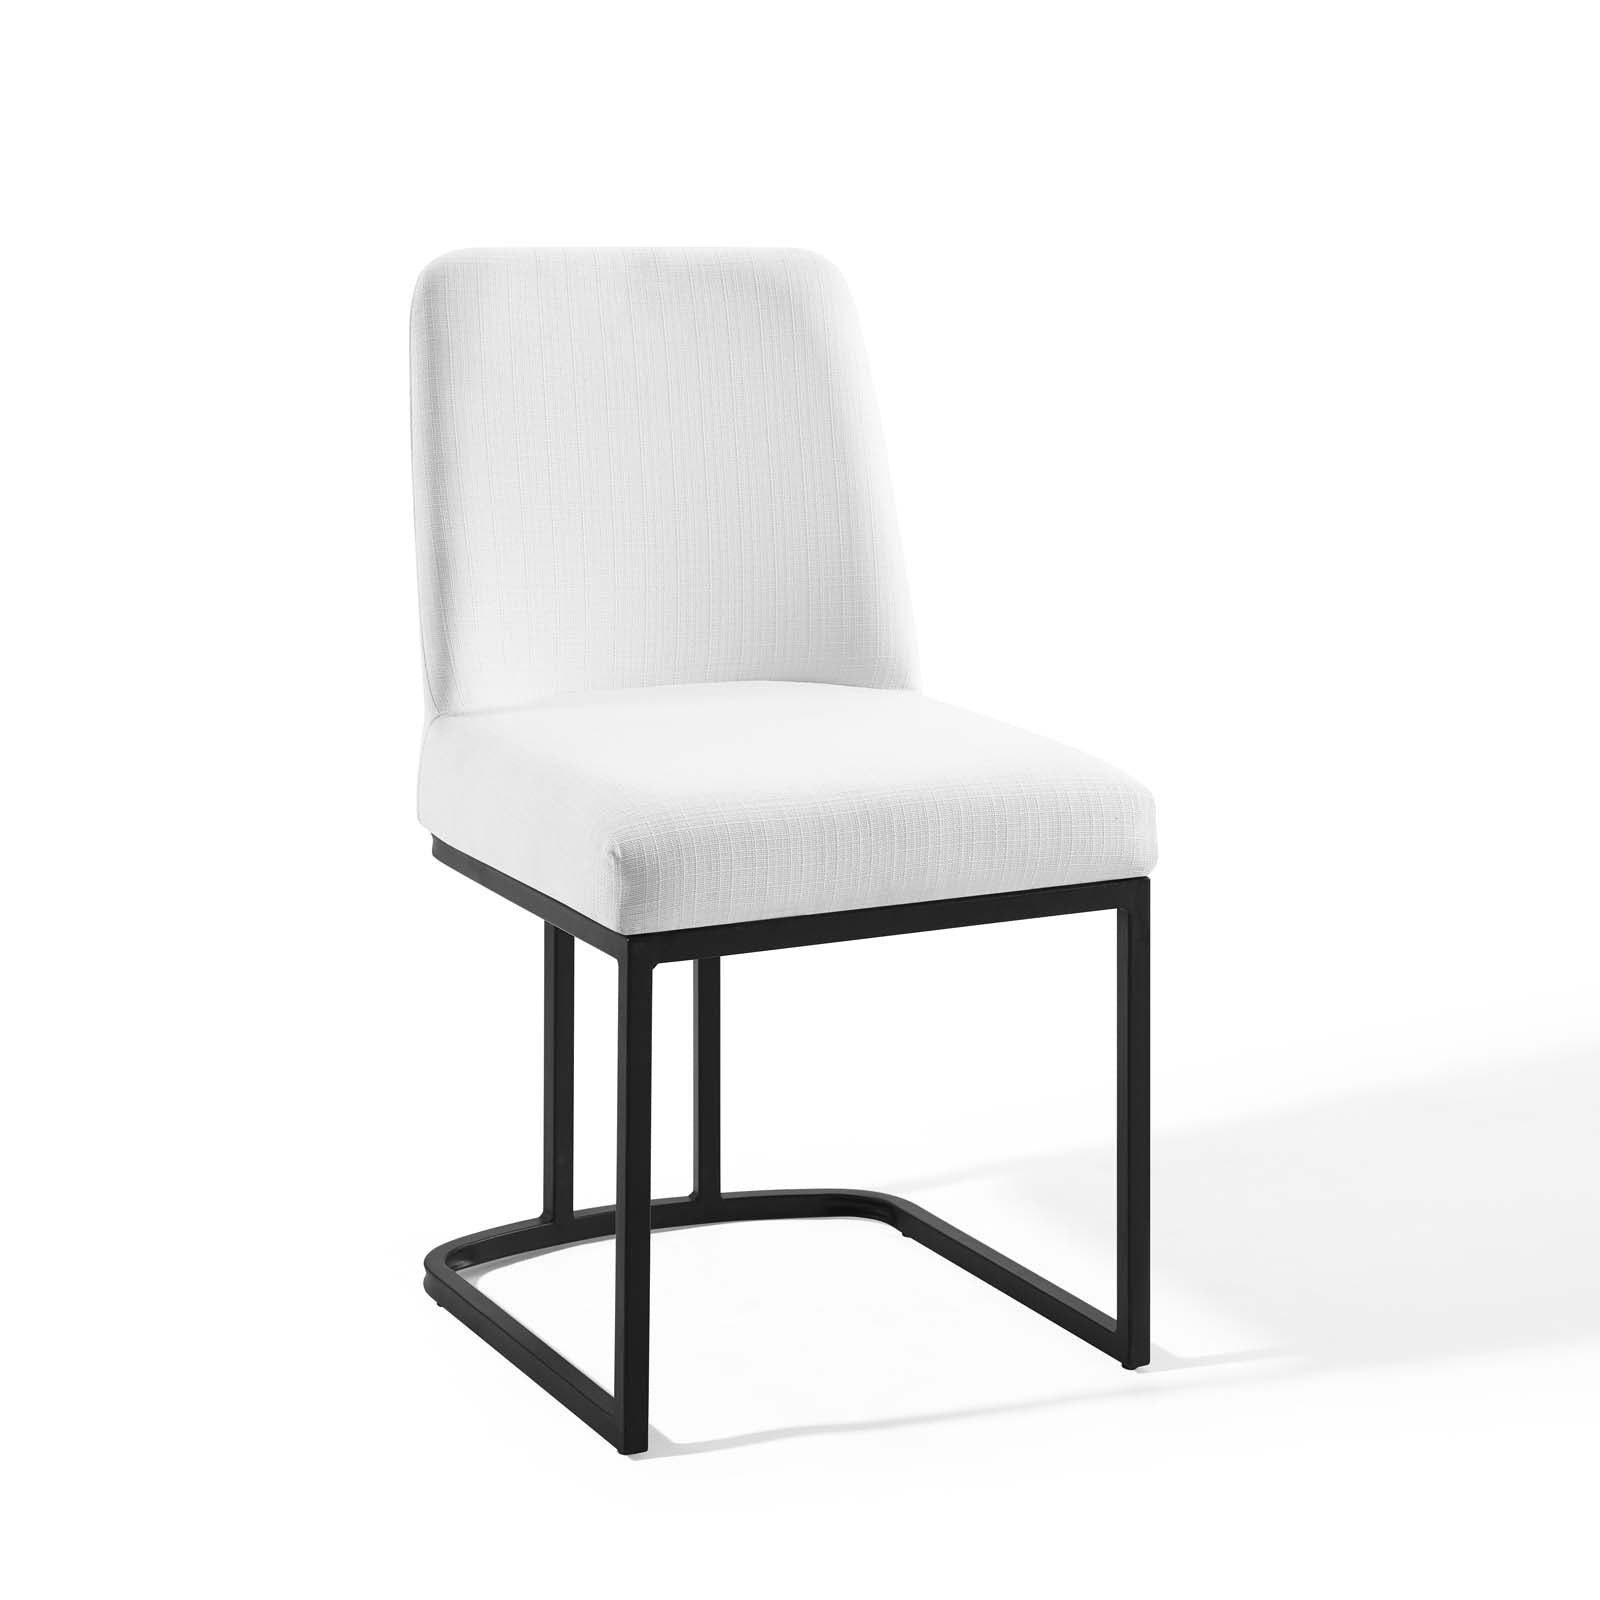 Modway Dining Chairs - Amplify Sled Base Upholstered Fabric Dining Side Chair Black White